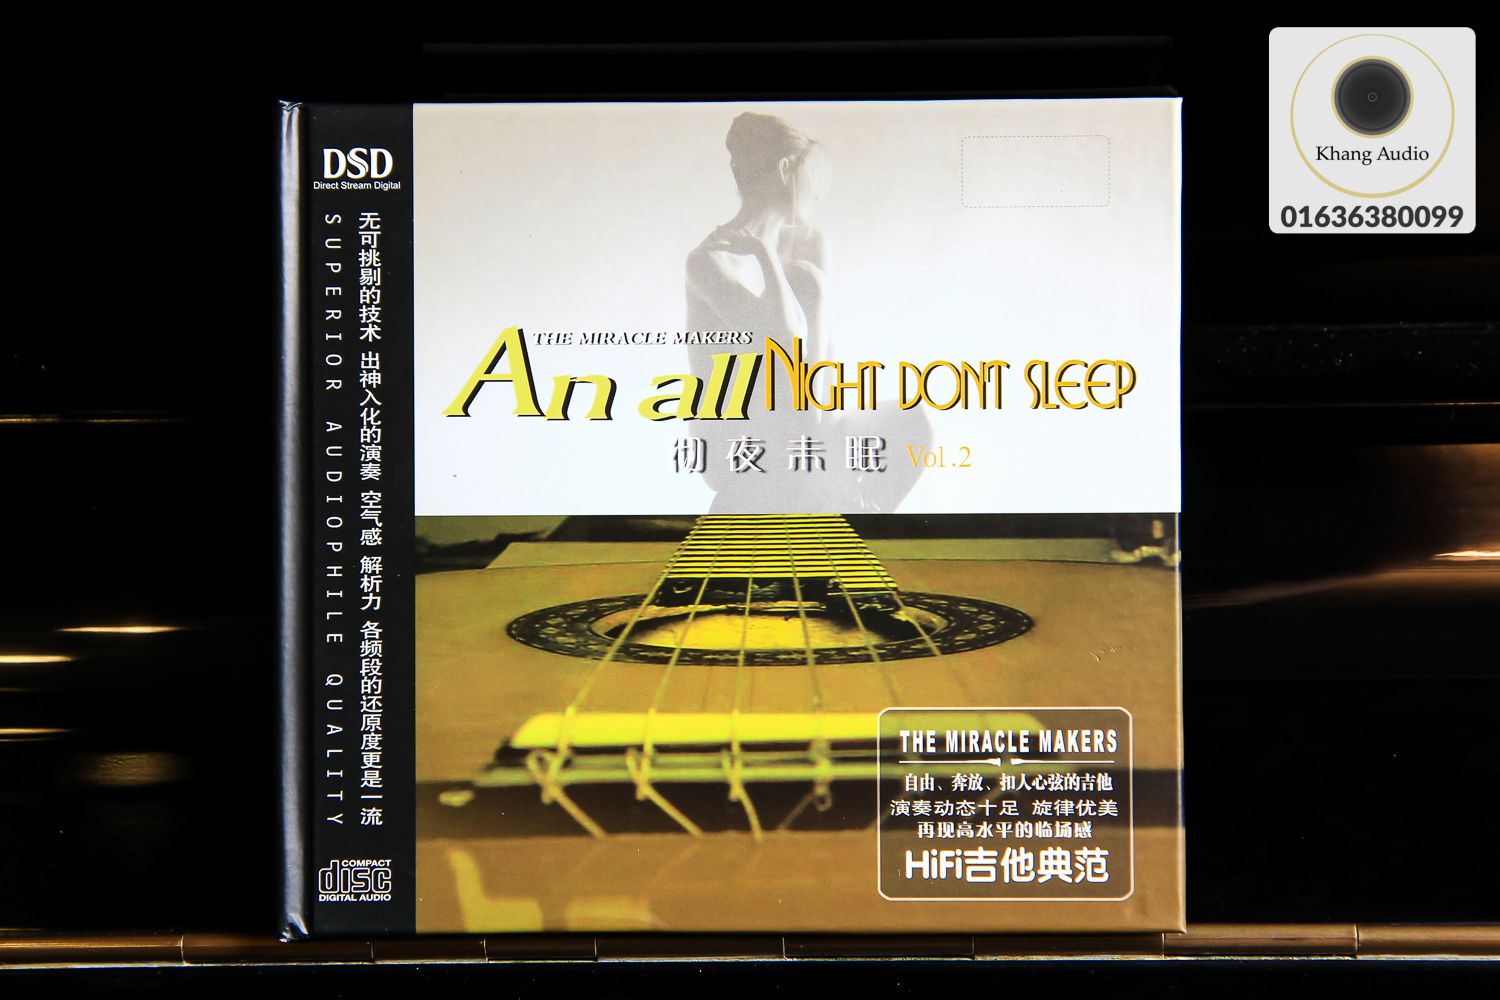 An All Night Don't Sleep Vol 2- The Miracle Makers Khang Audio 0336380099